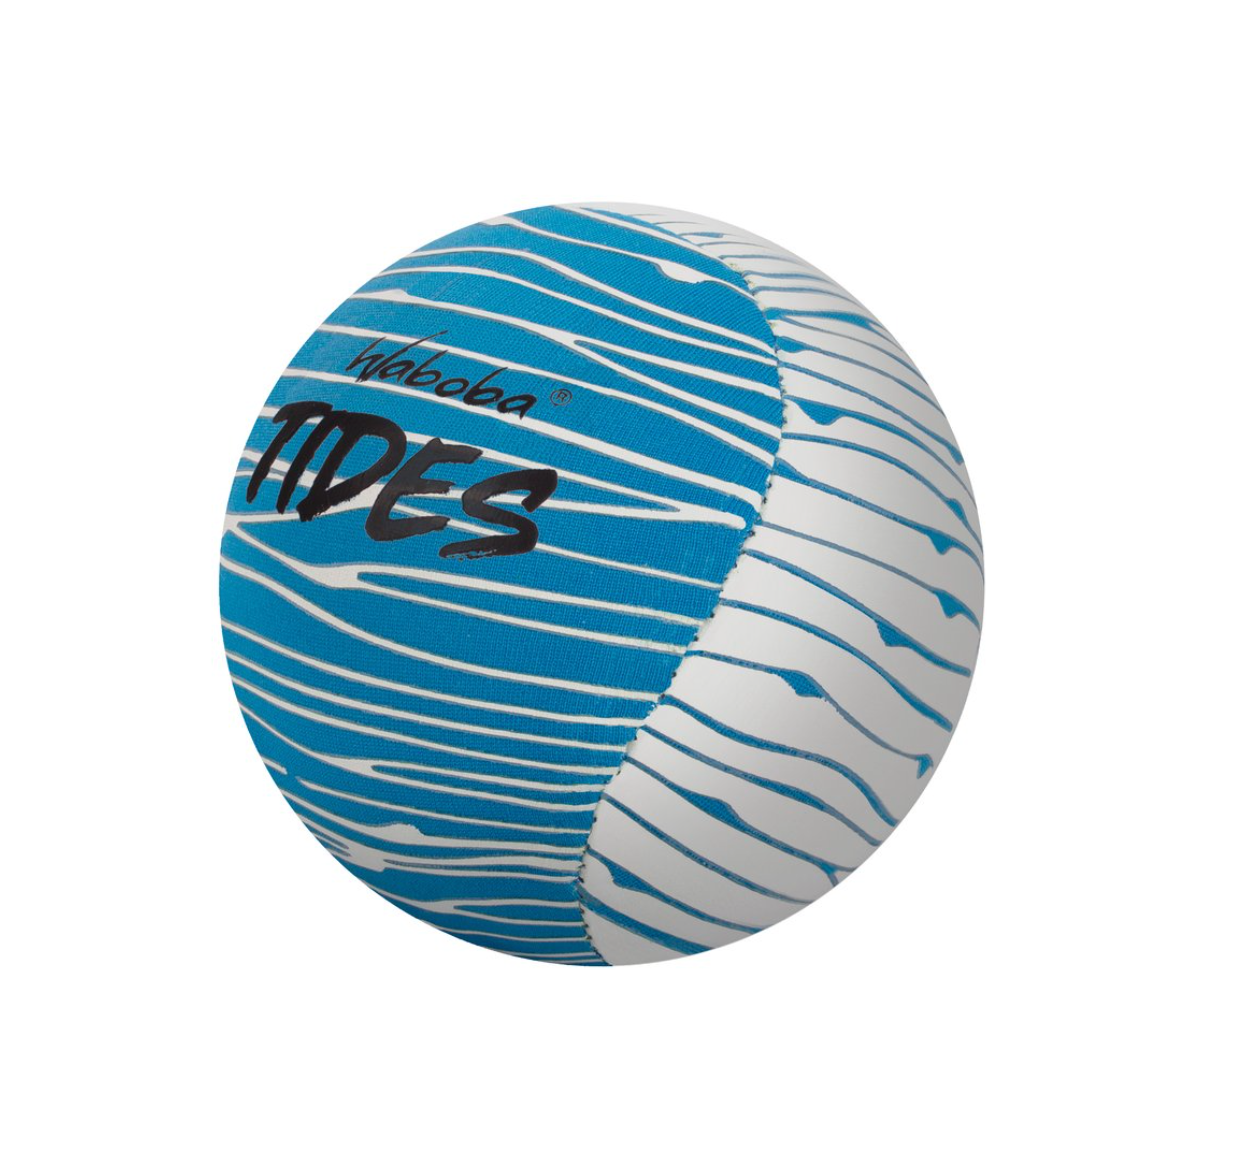 Tides Ball (Assorted Colors)